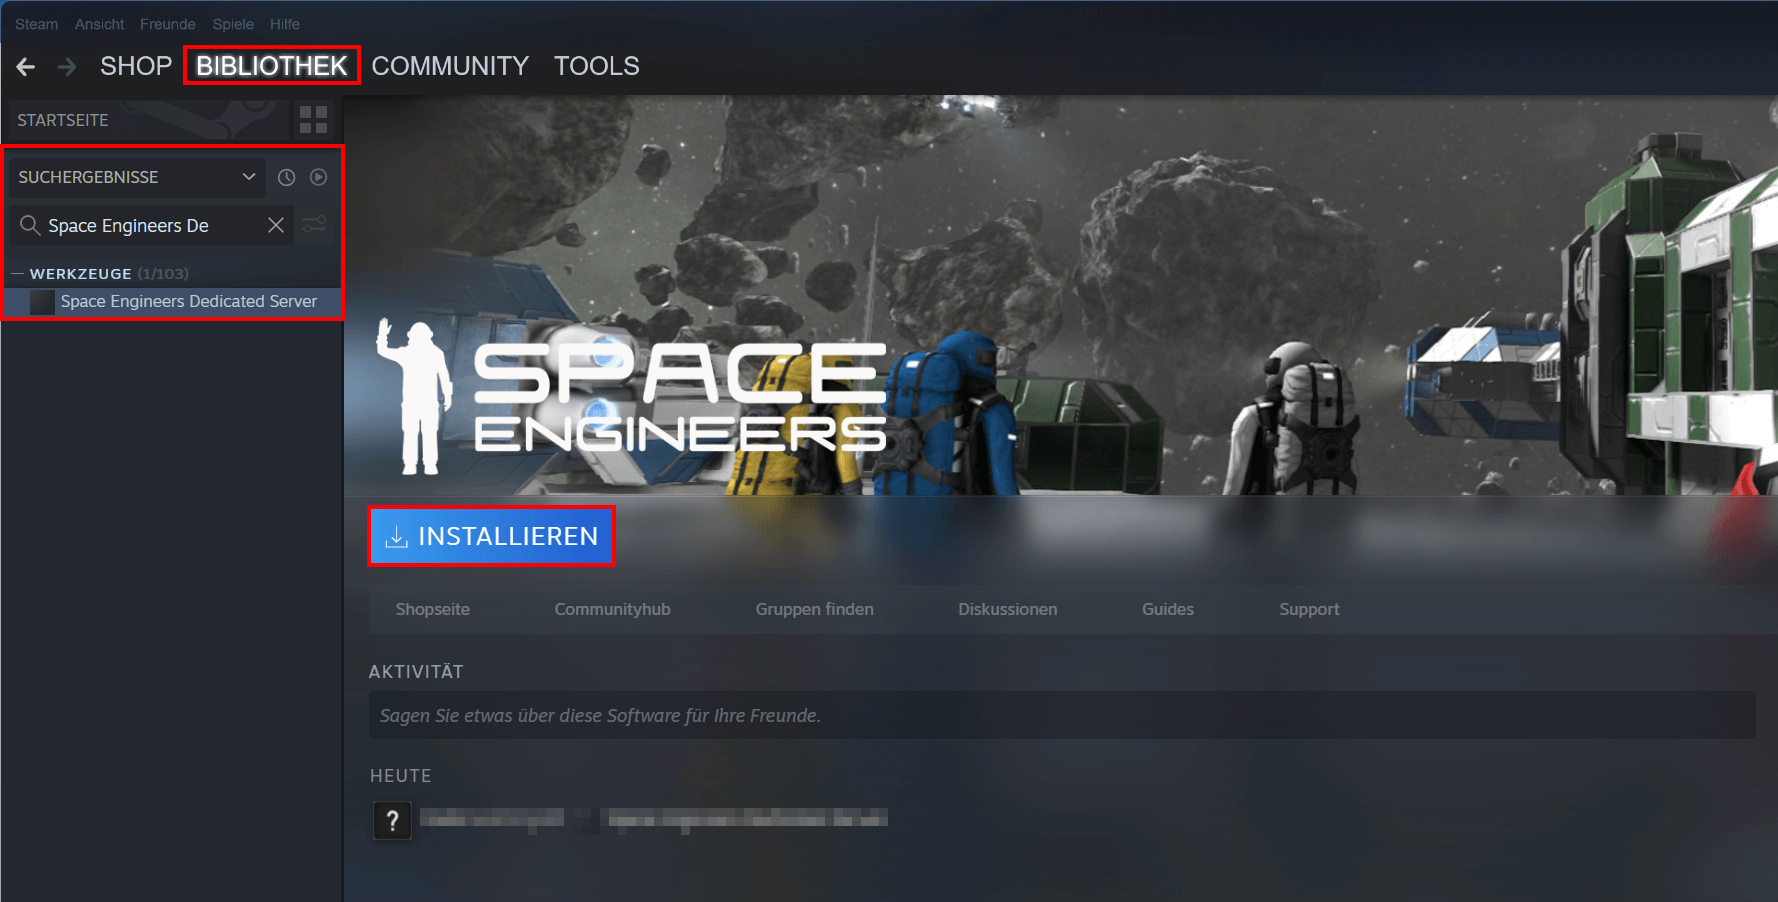 Steam-Client: Installation des Space-Engineers-Dedicated-Servers